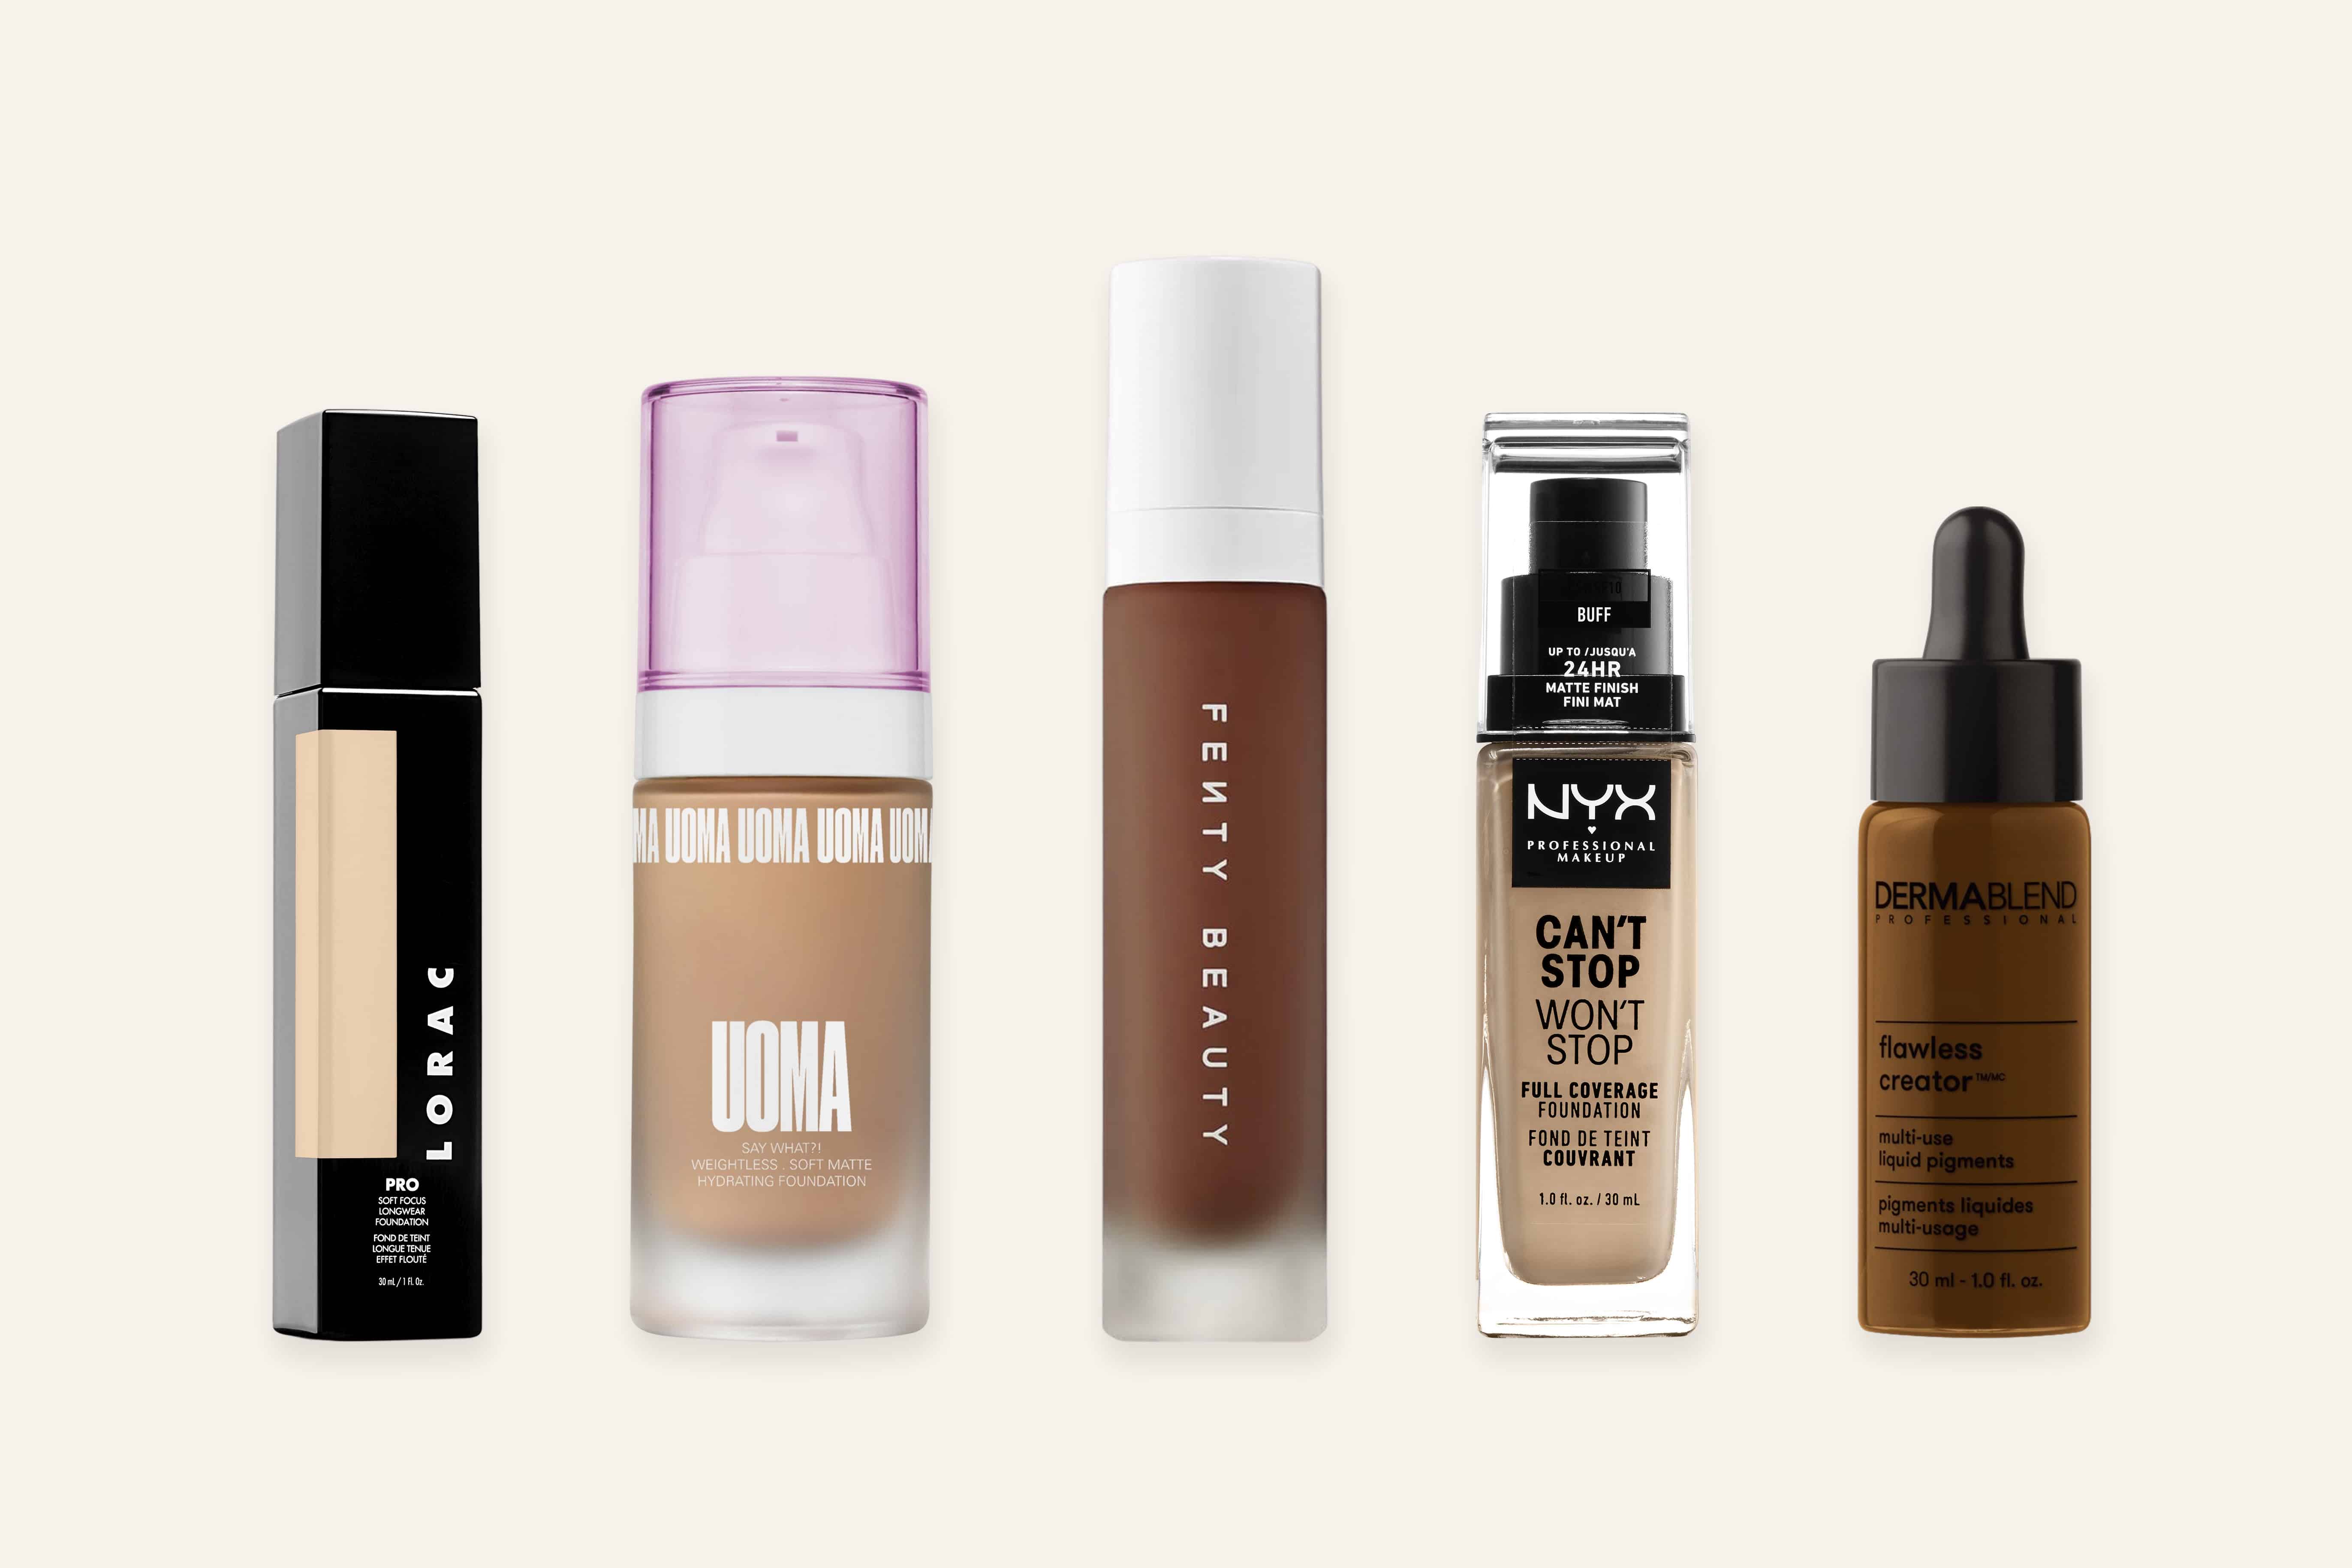 Wearing a mask has proven to be less than compatible with foundation. Learn about the best transfer-resistant foundations to wear with your mask.